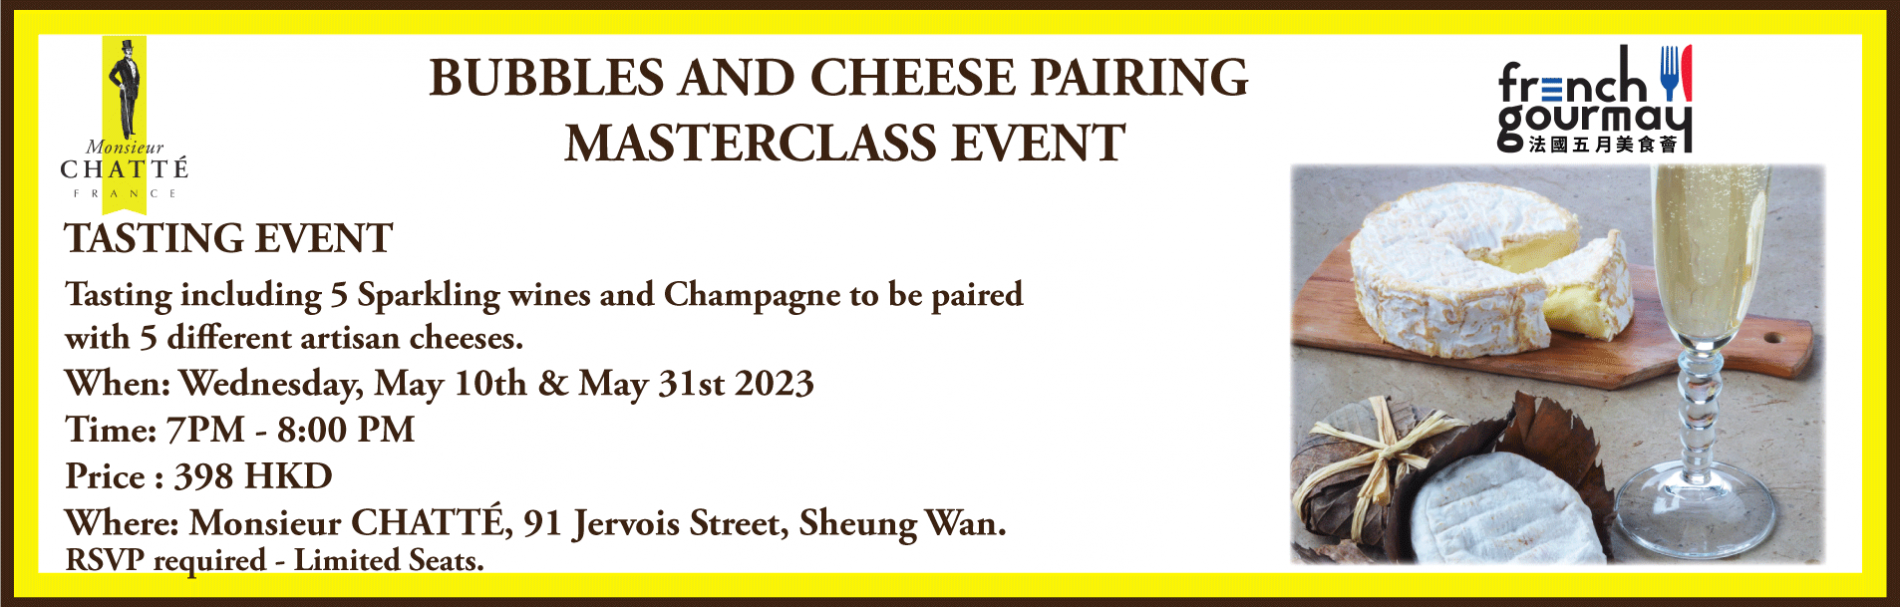 BUBBLES AND CHEESE MASTERCLASS PAIRING EVENT